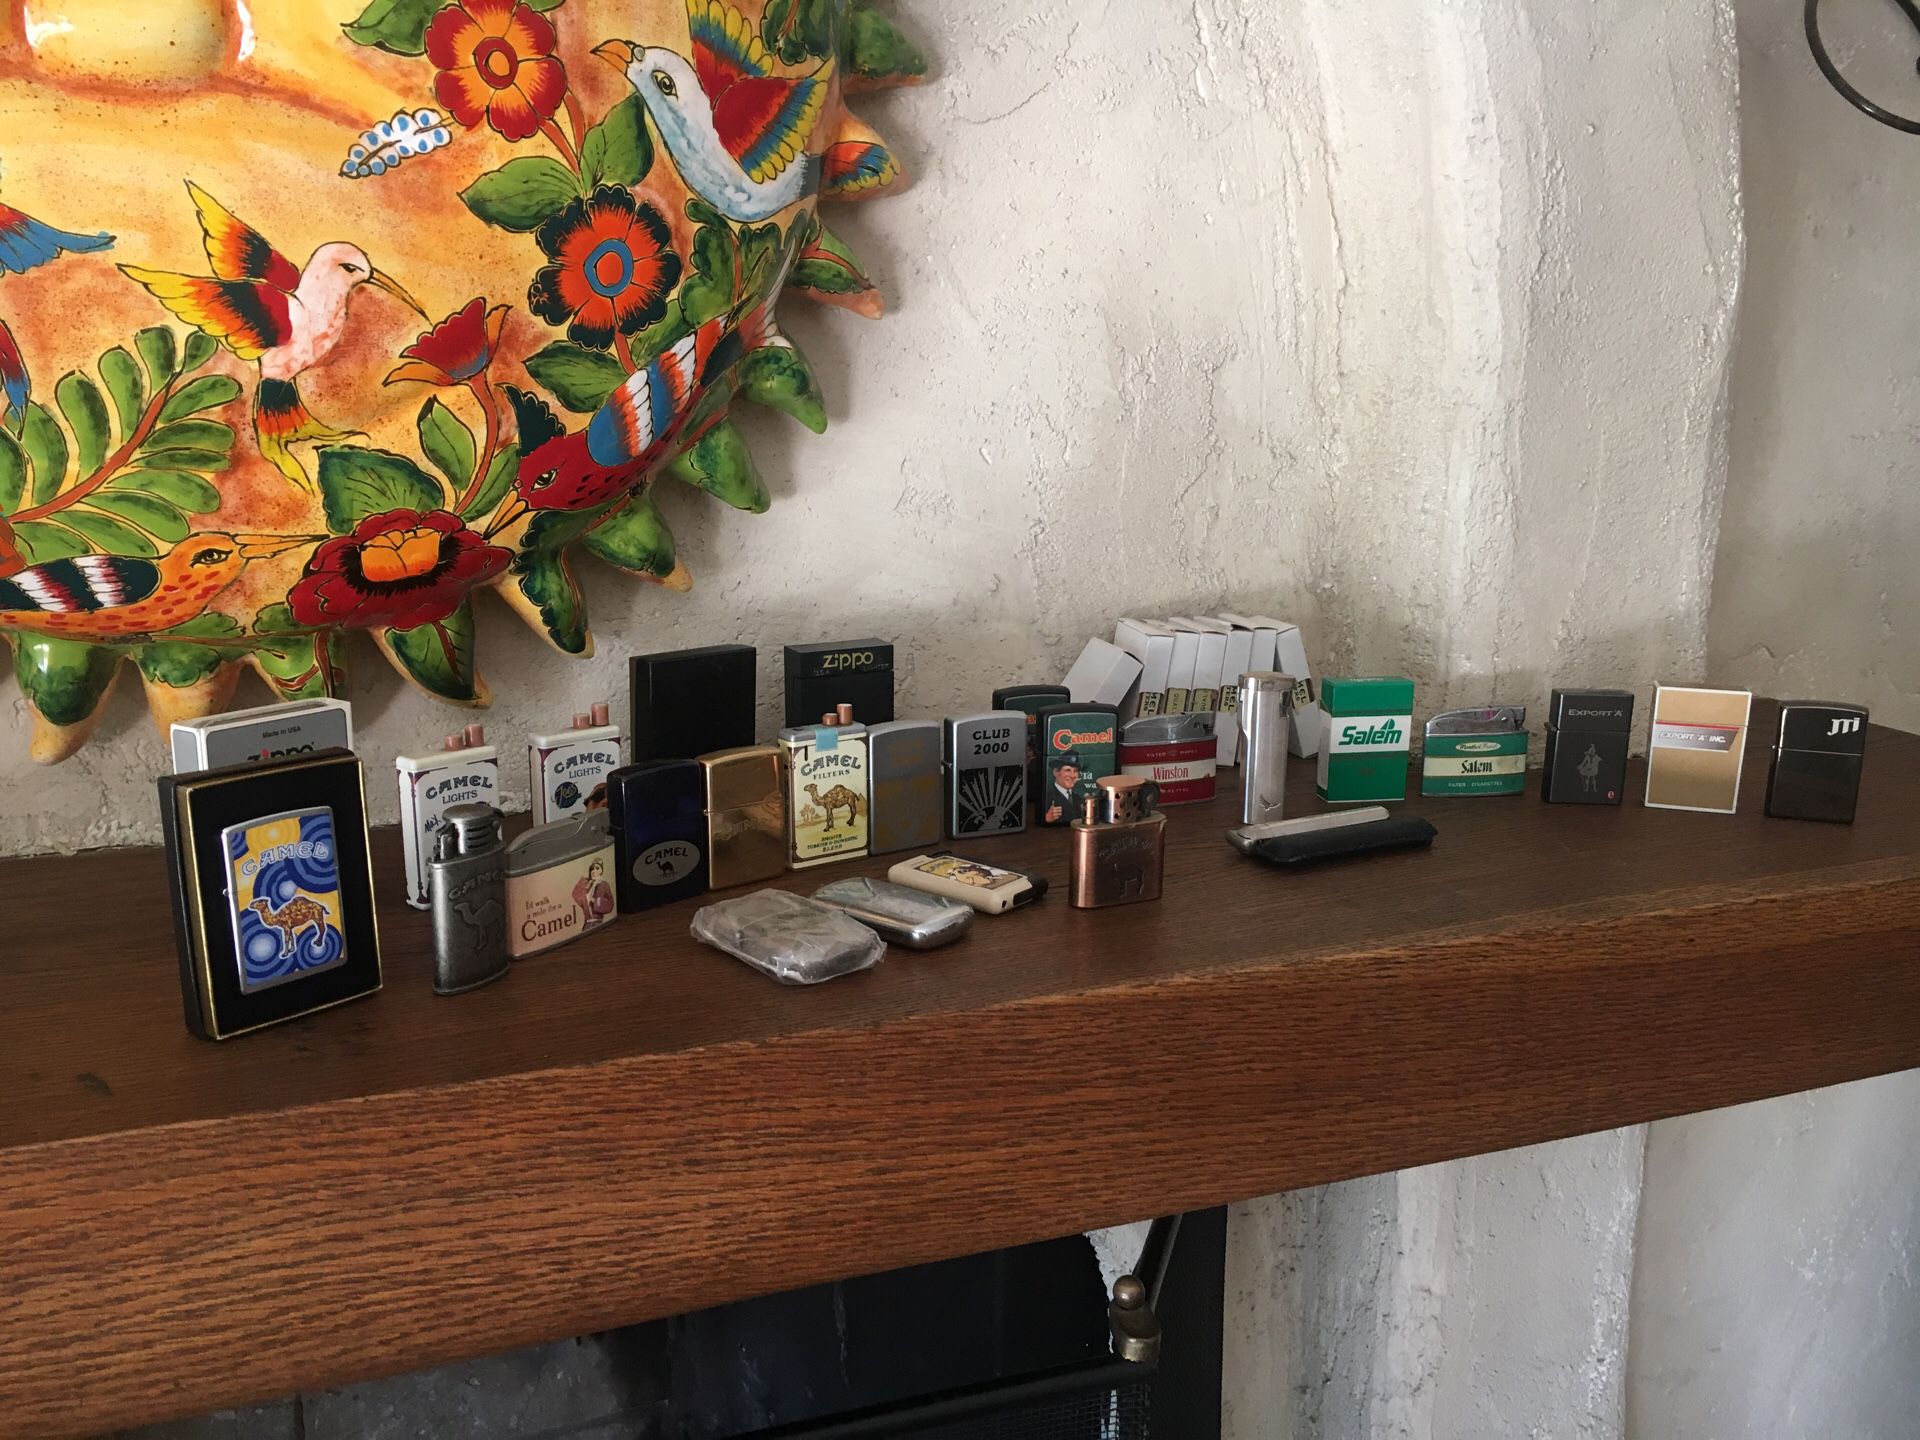 Zippo and other styles